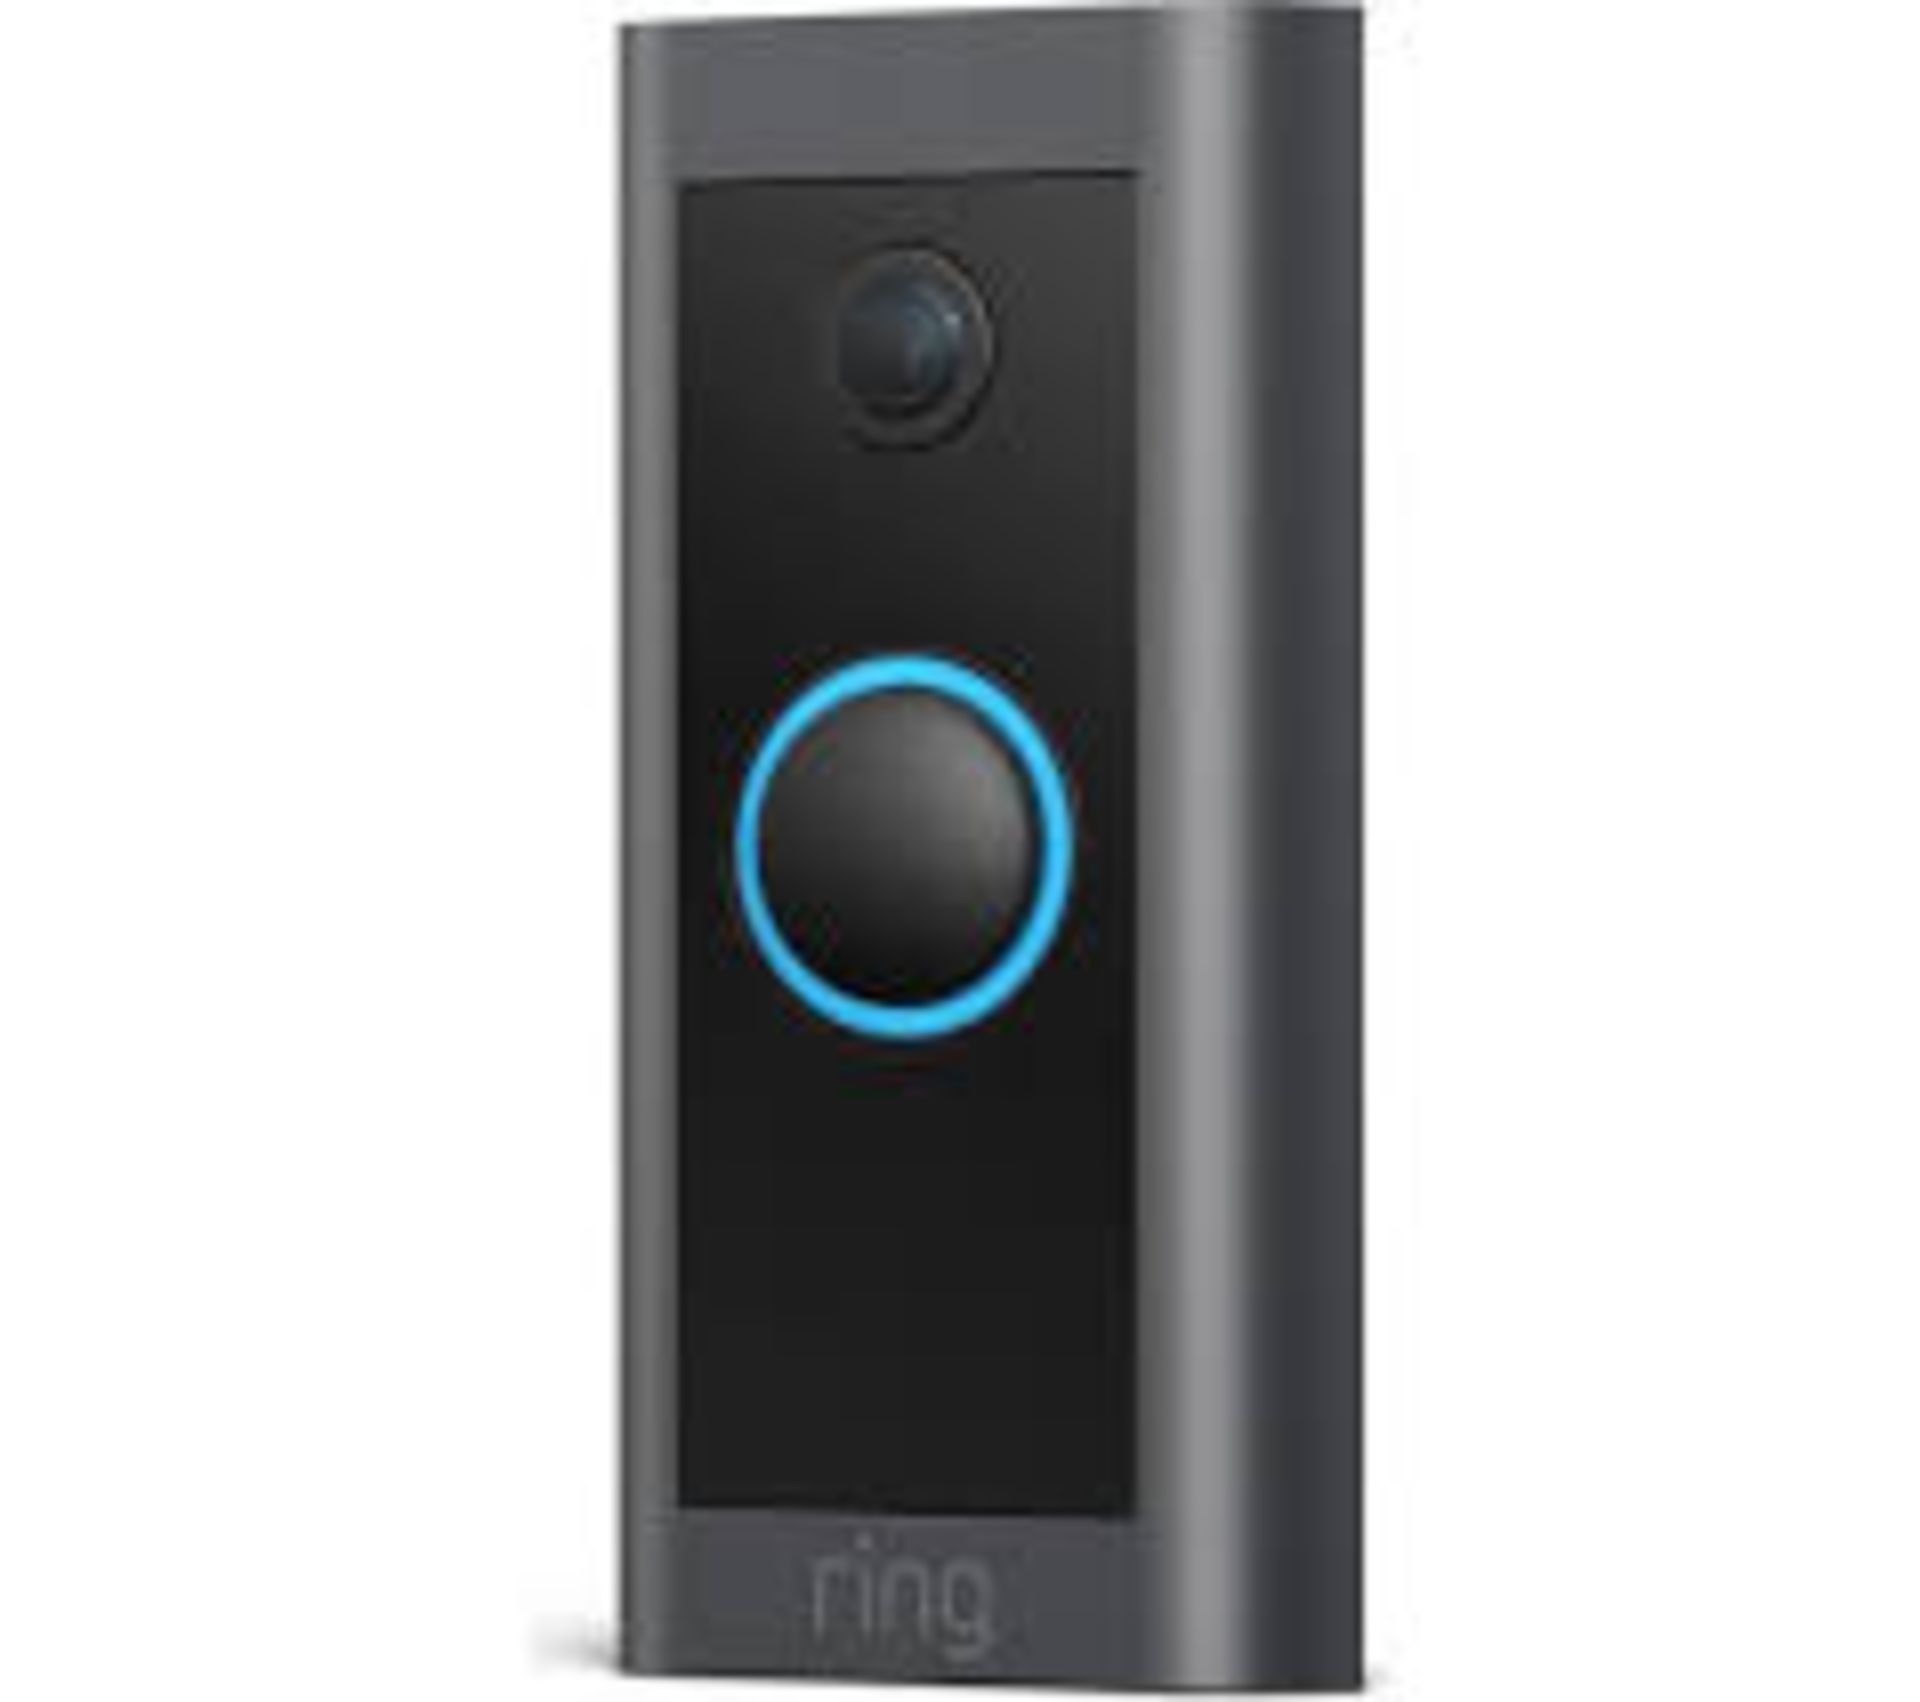 6 x RING Video Doorbell - Wired. - Pw. With the Ring Video Doorbell, you'll always know who's at the